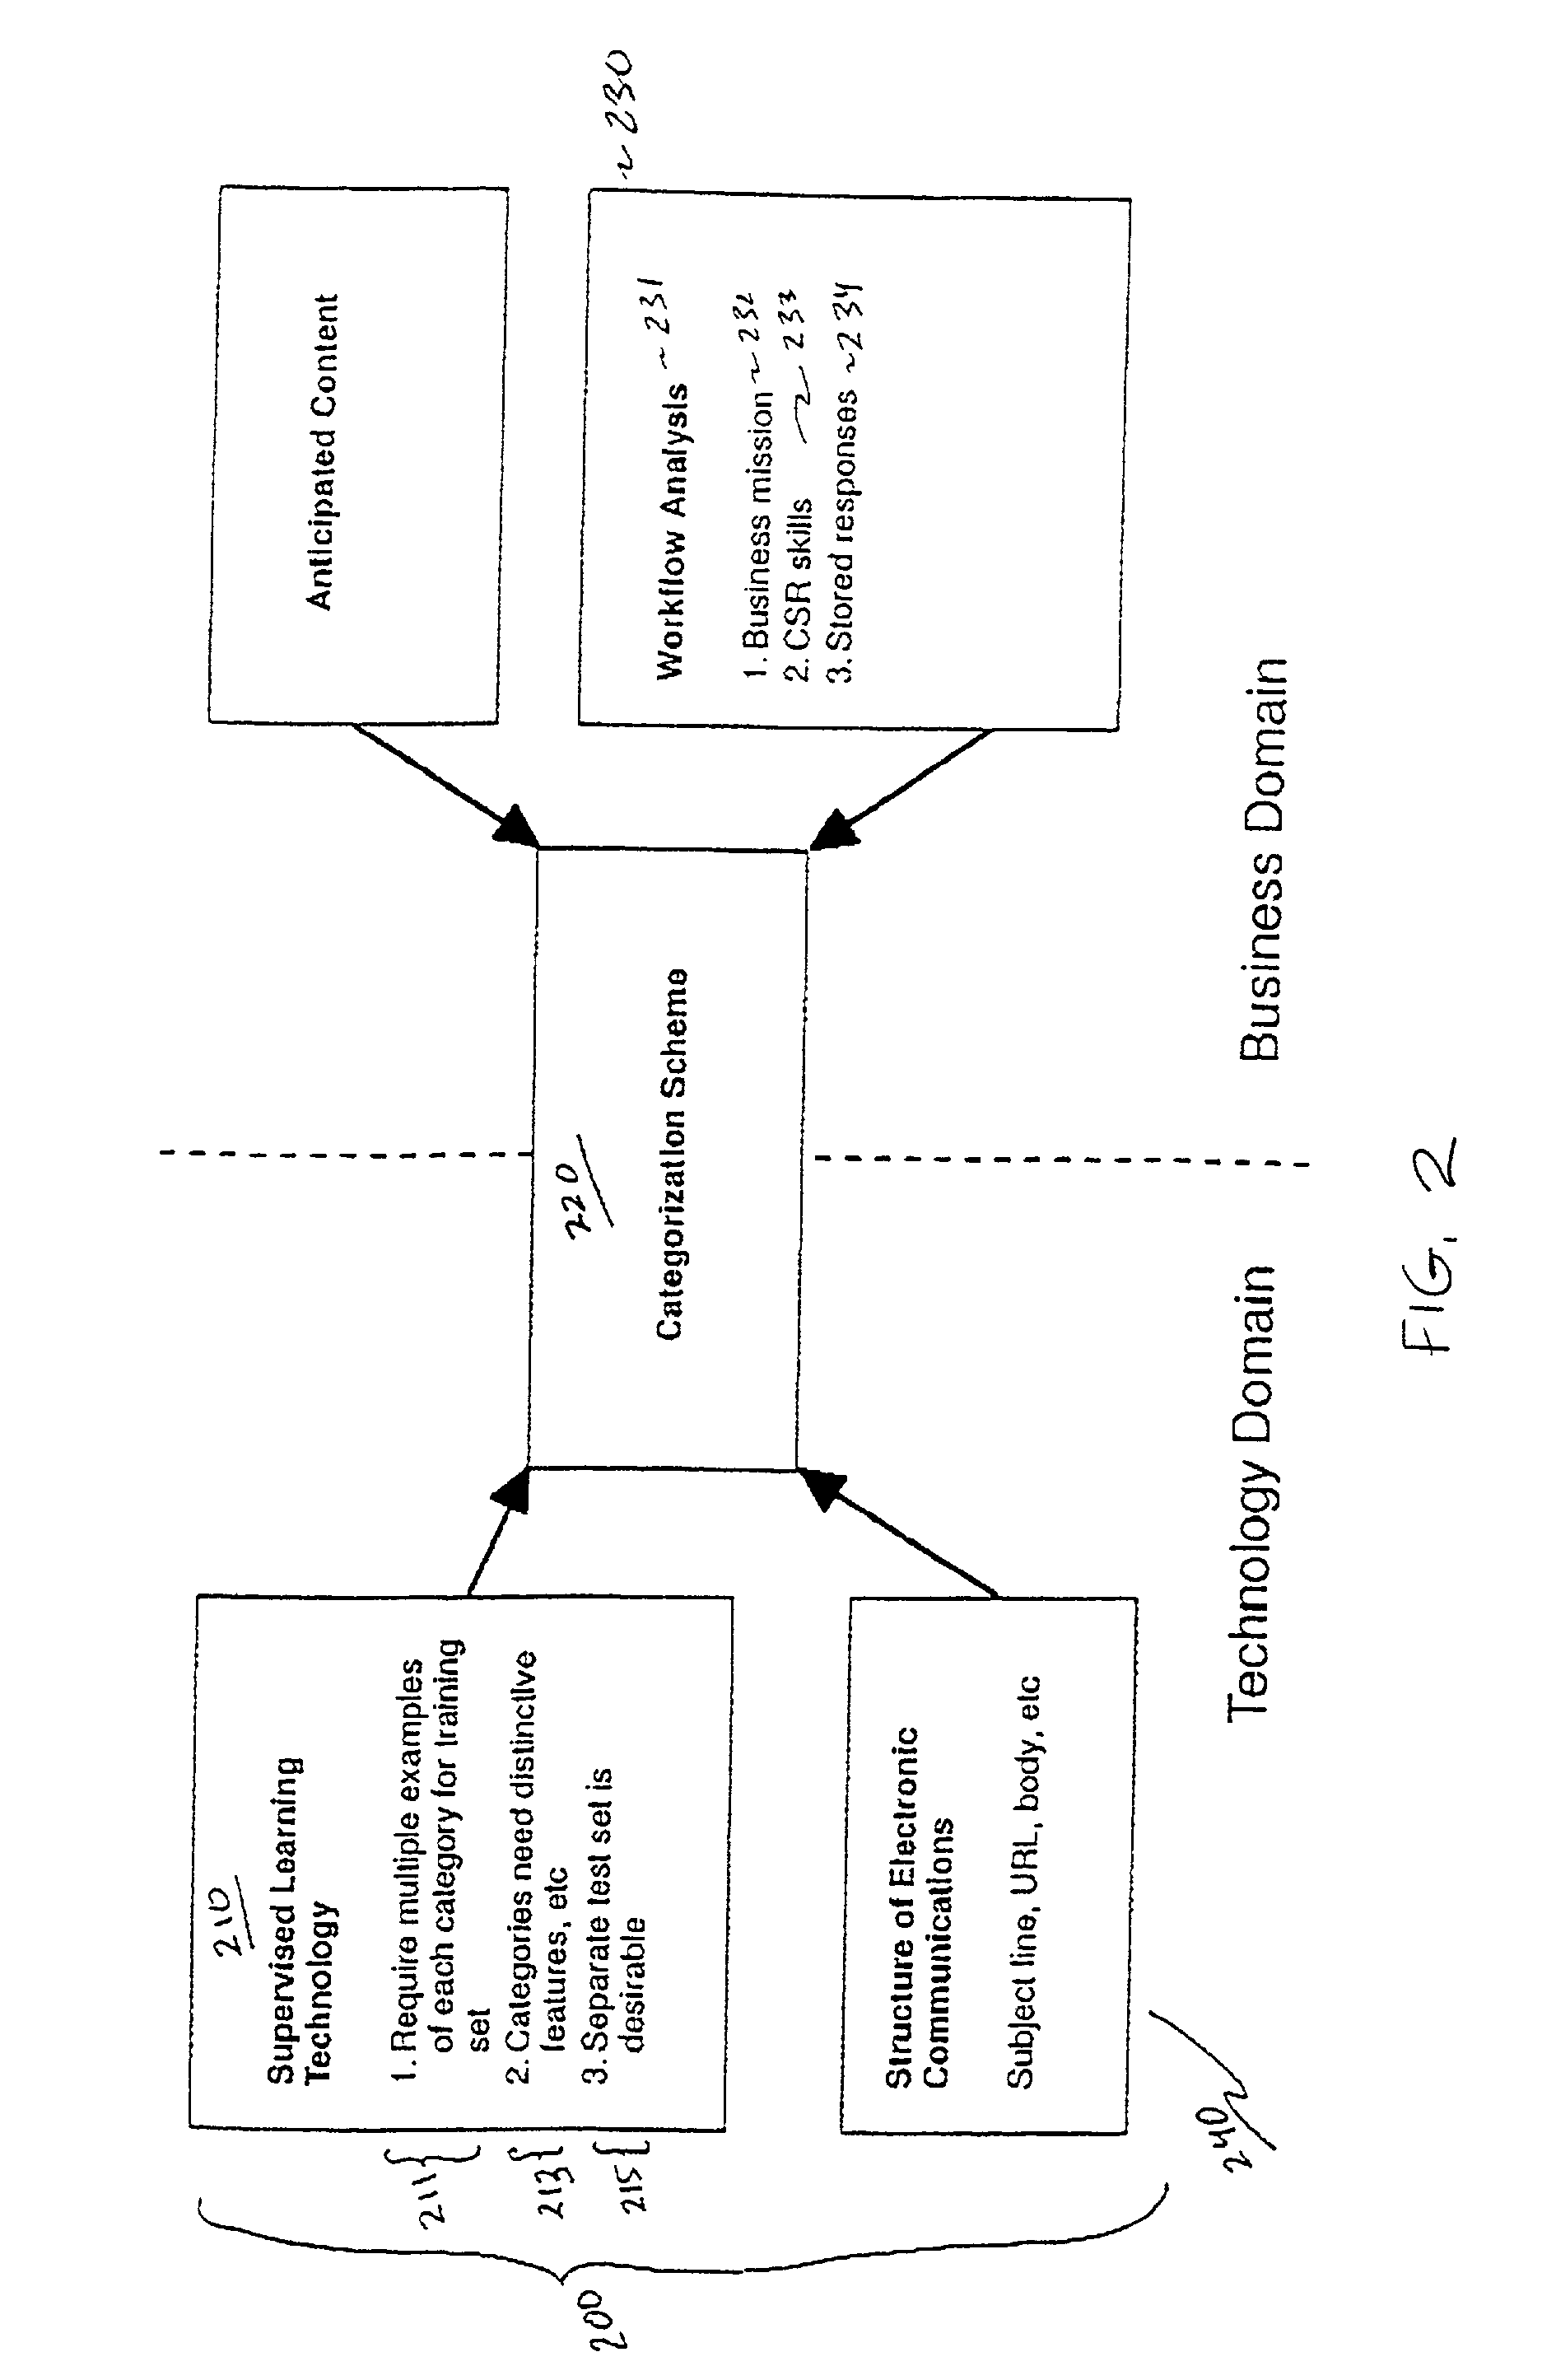 Methodology for creating and maintaining a scheme for categorizing electronic communications